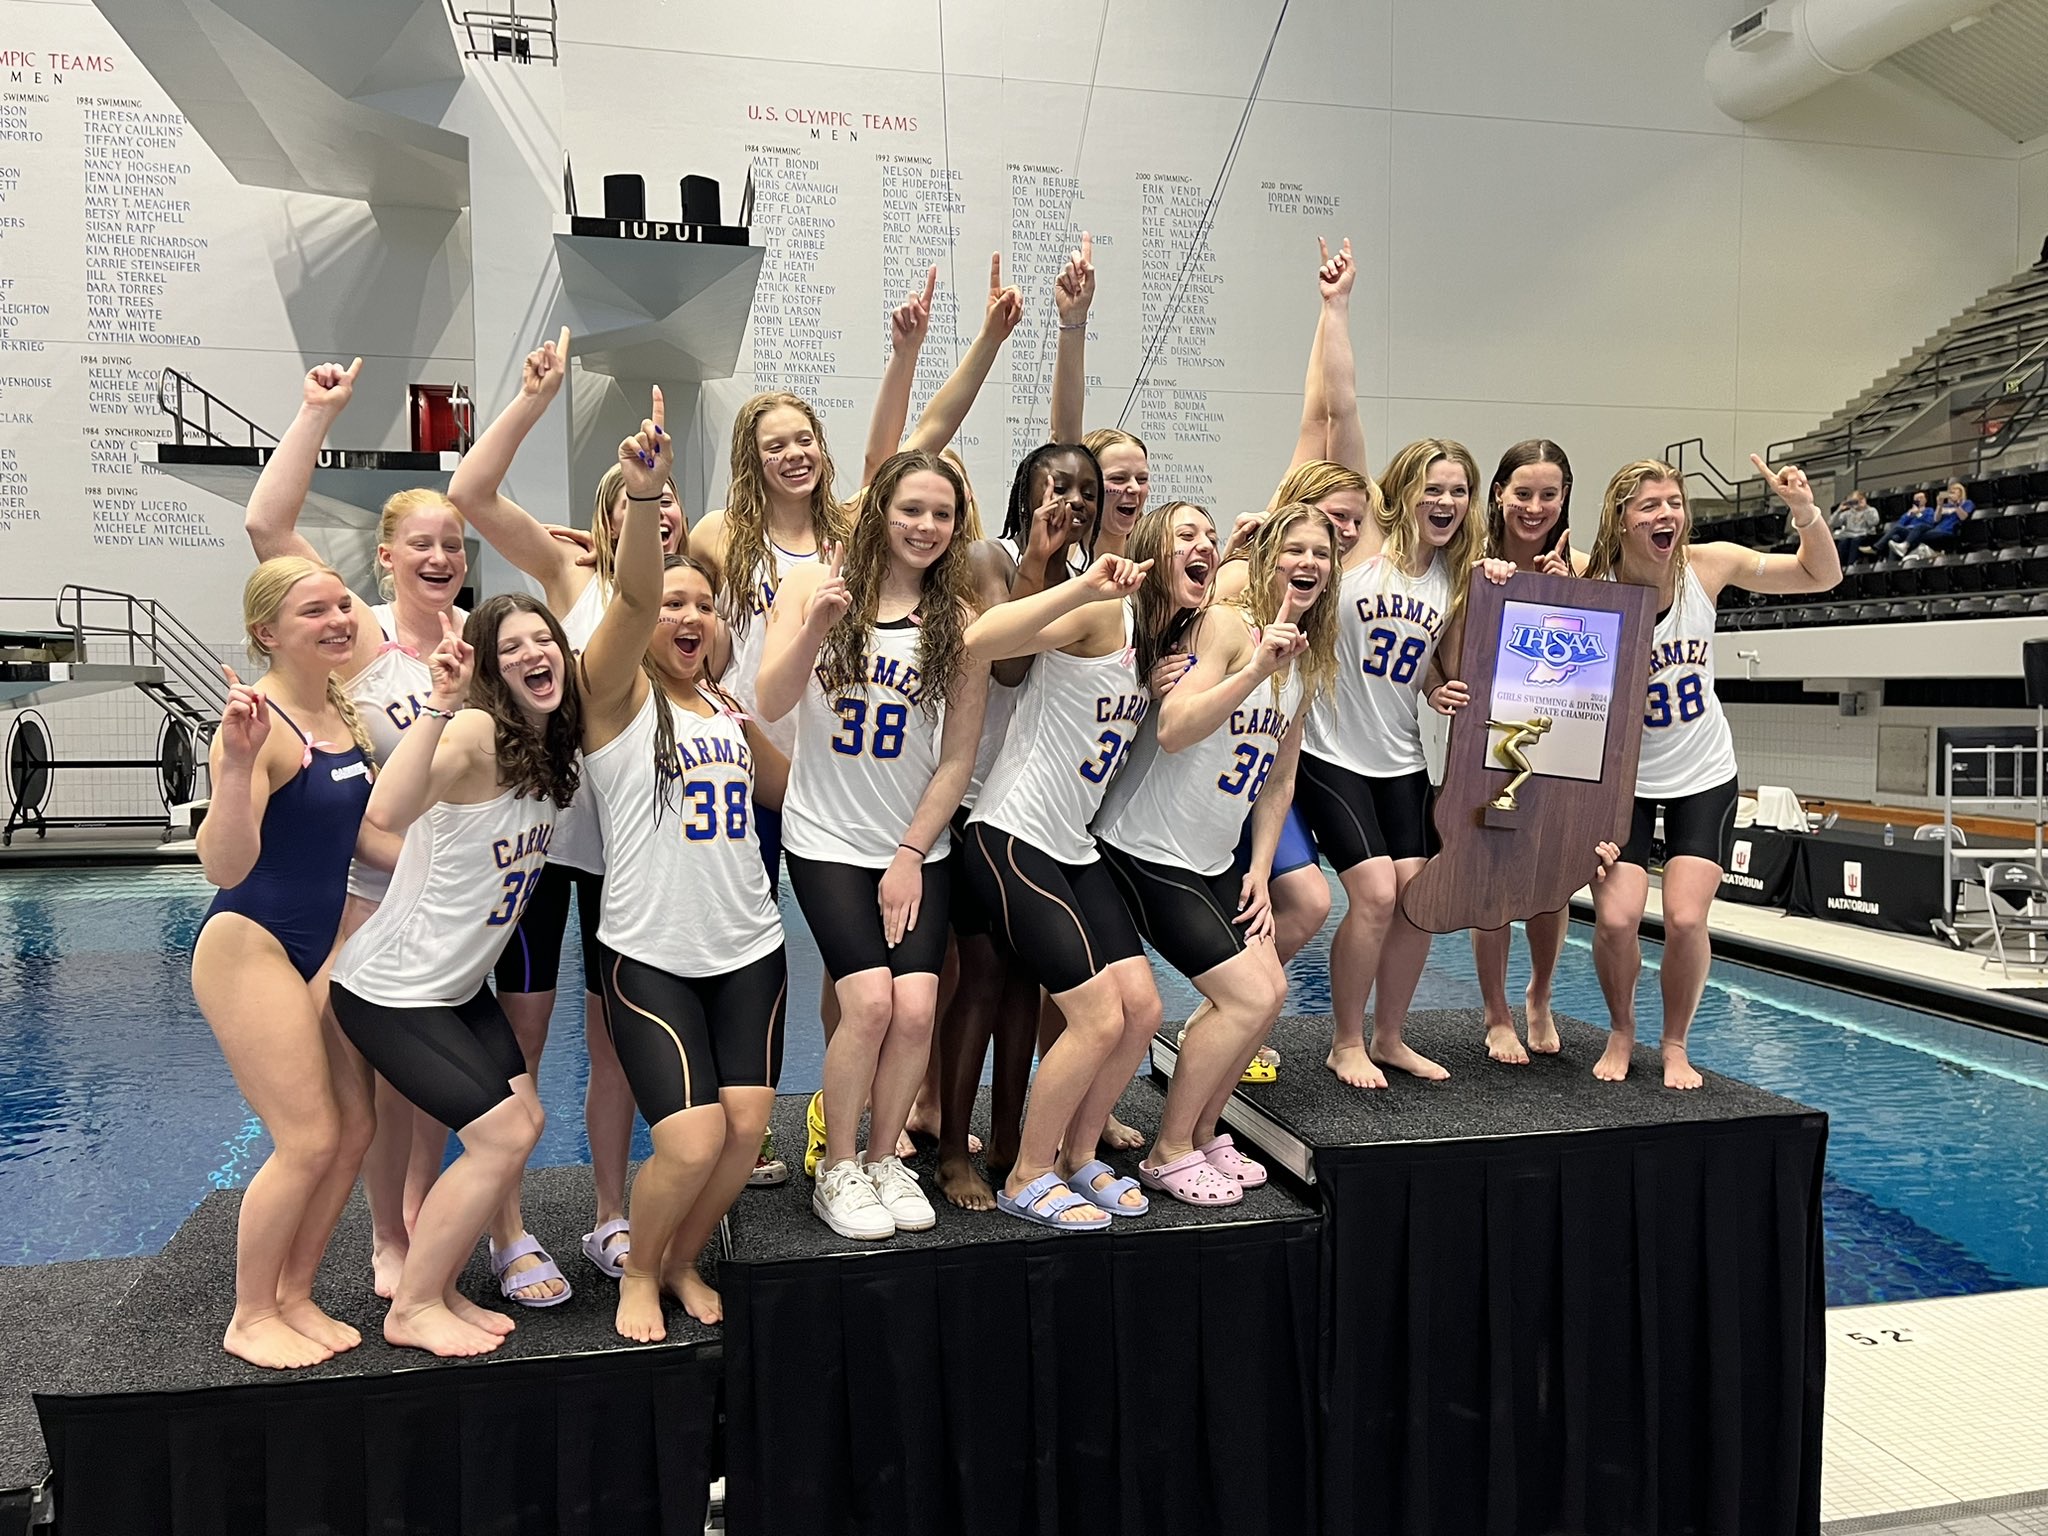 Carmel High School girls swimming team keeps making waves with 38th straight state title